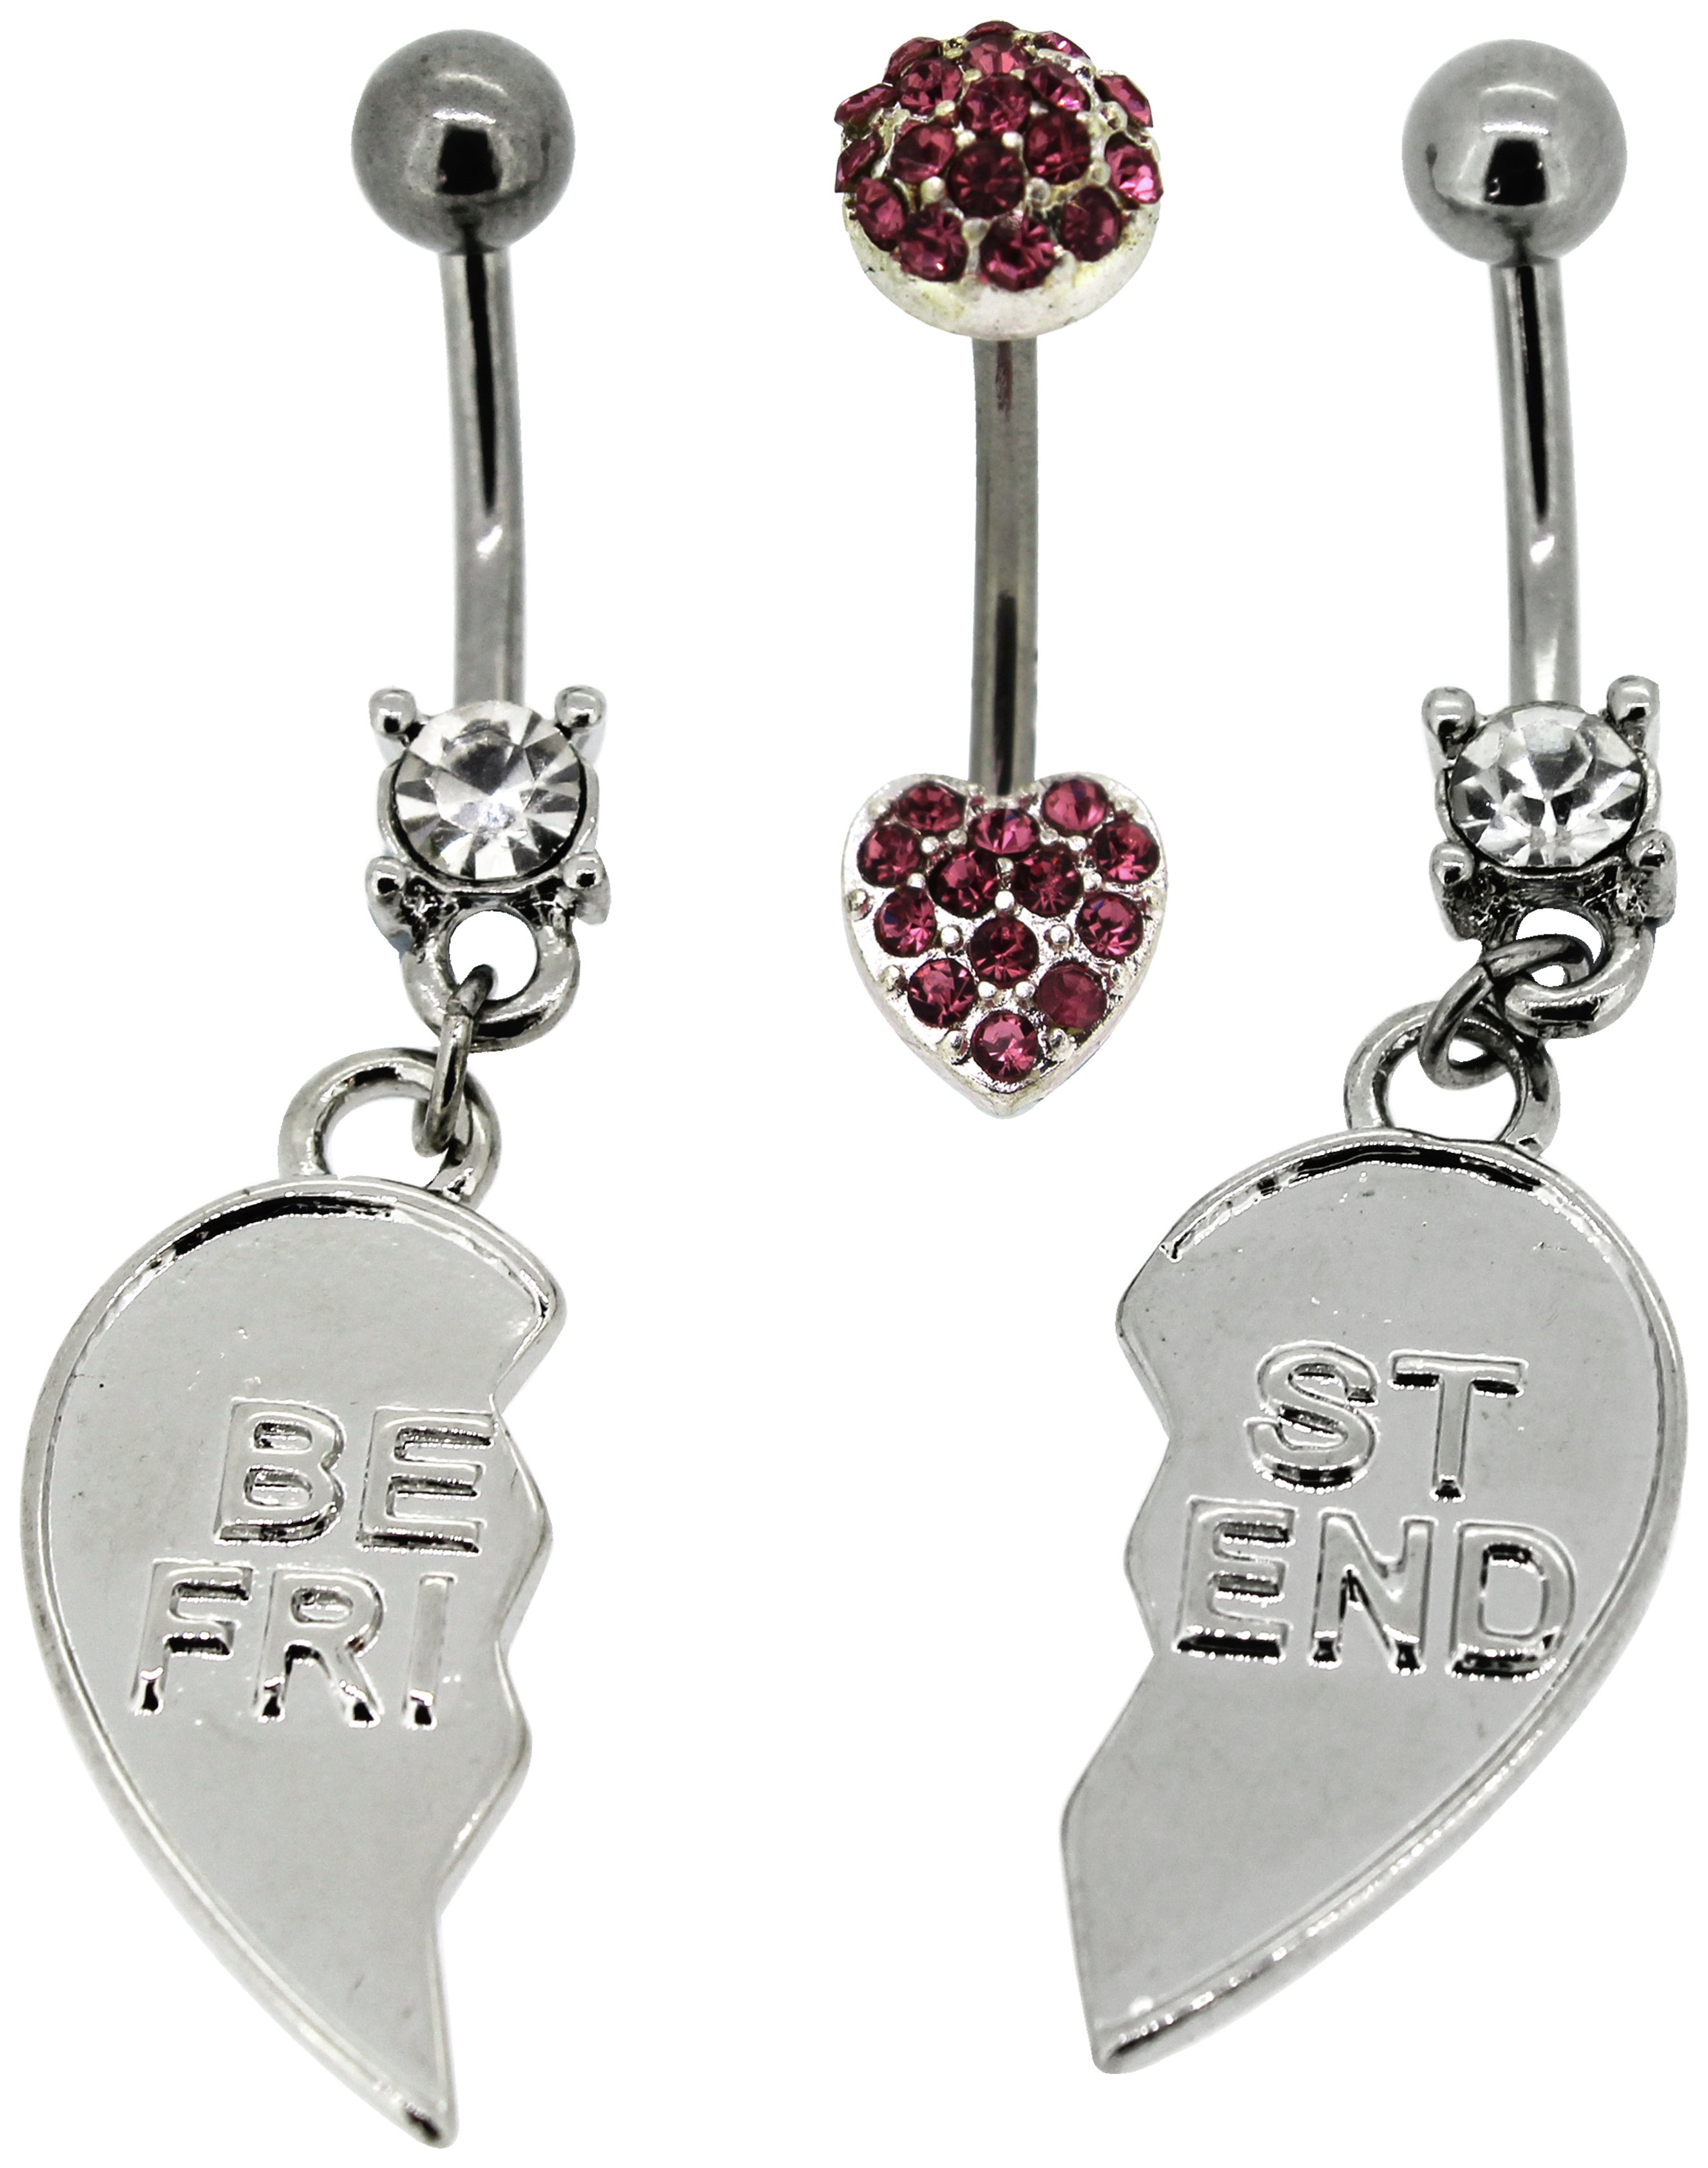 Link Up Stainless Steel Pink Crystal Belly Bars - Set of 3